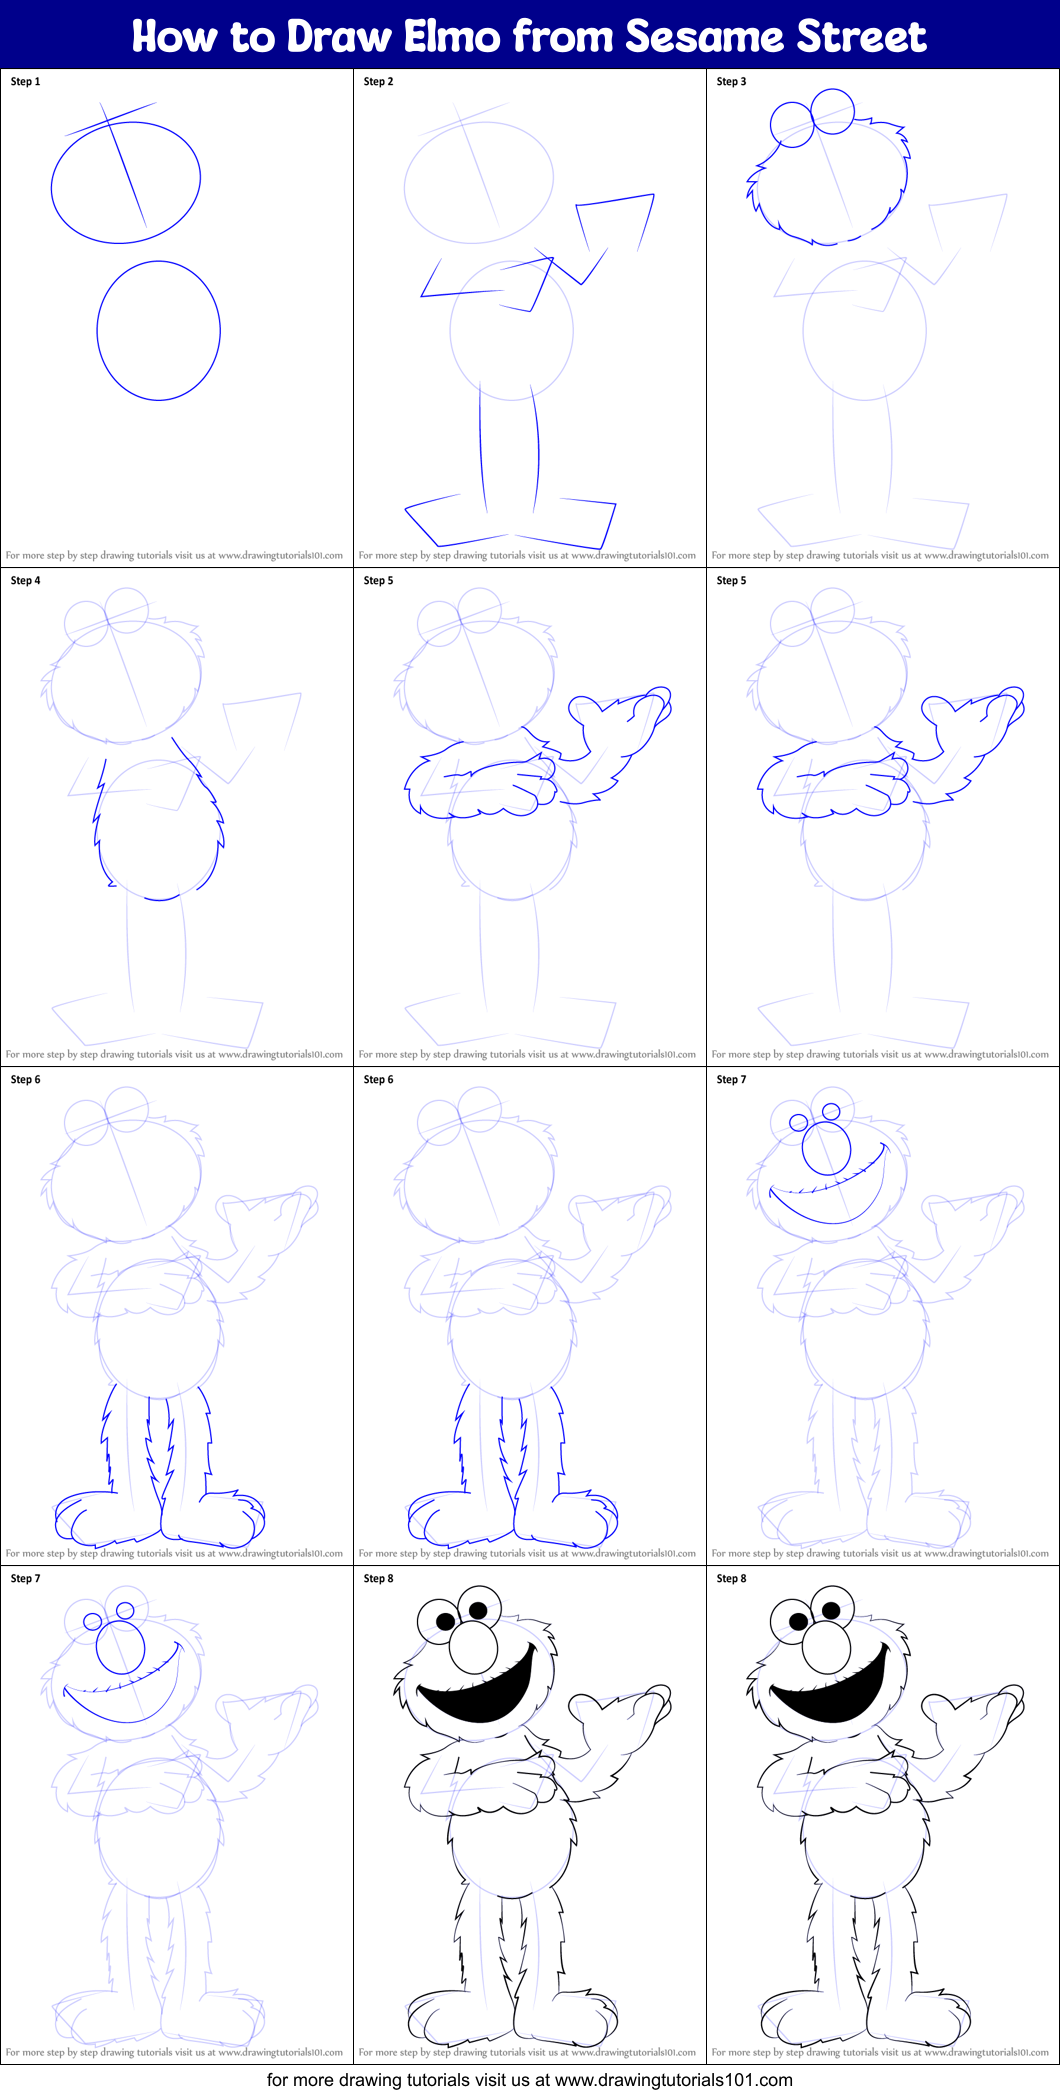 How to Draw Elmo from Sesame Street printable step by step drawing